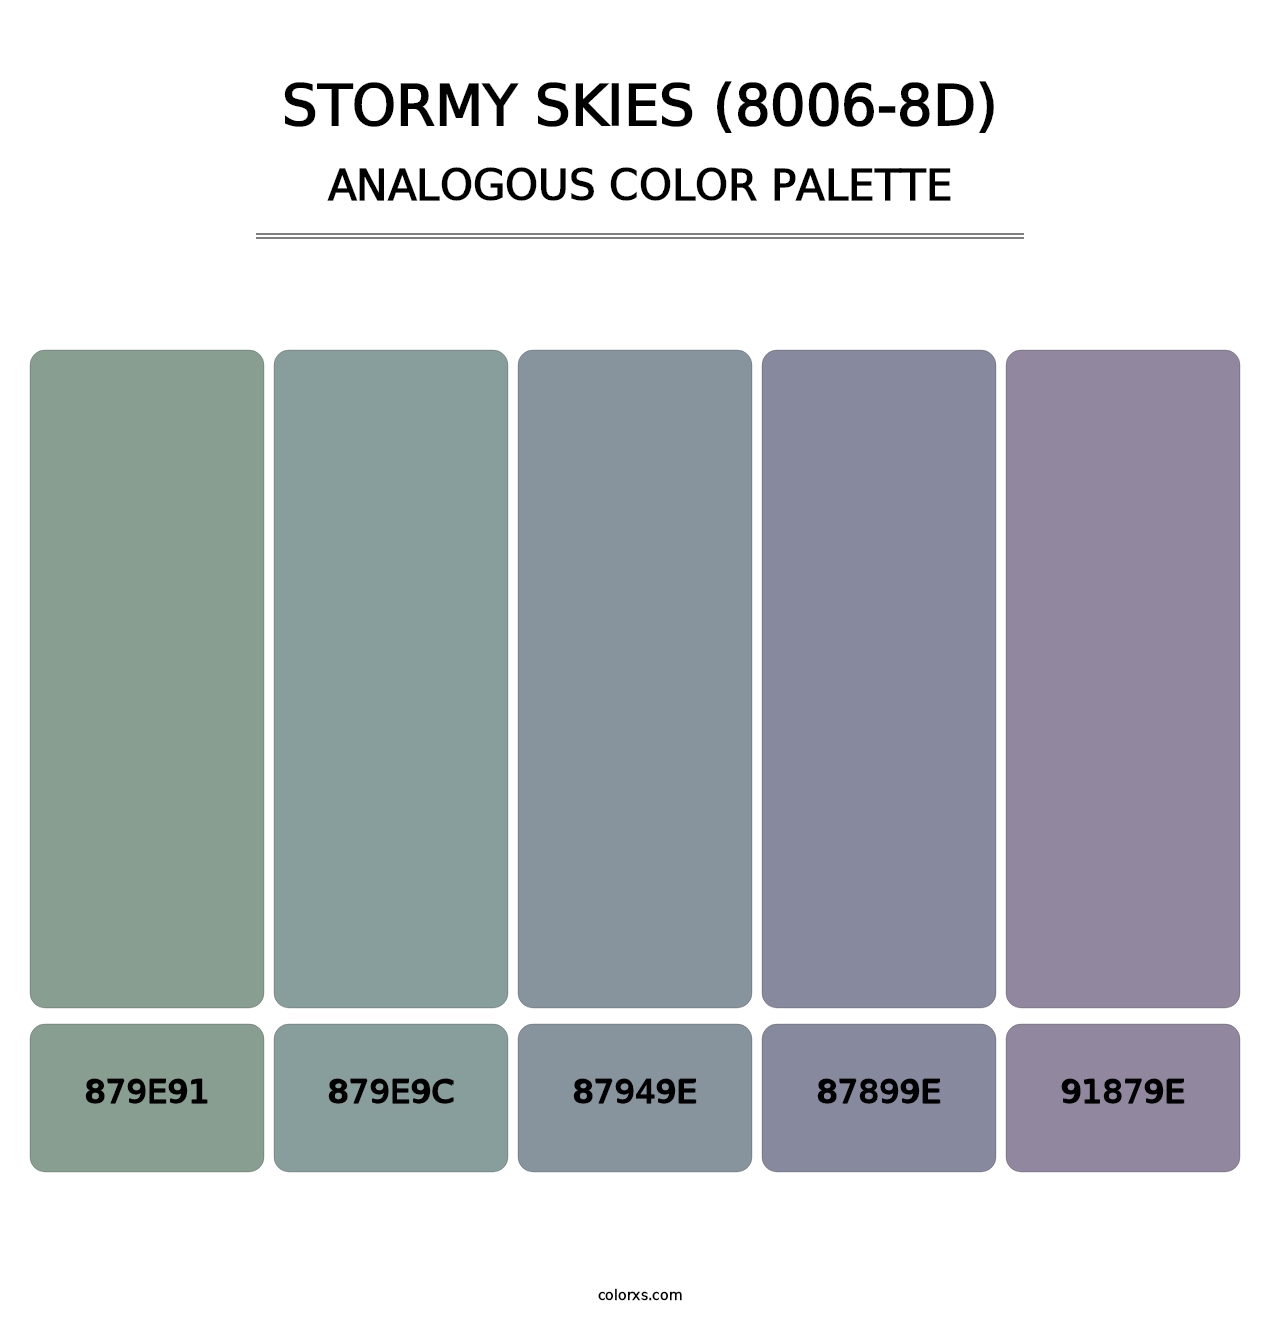 Stormy Skies (8006-8D) - Analogous Color Palette